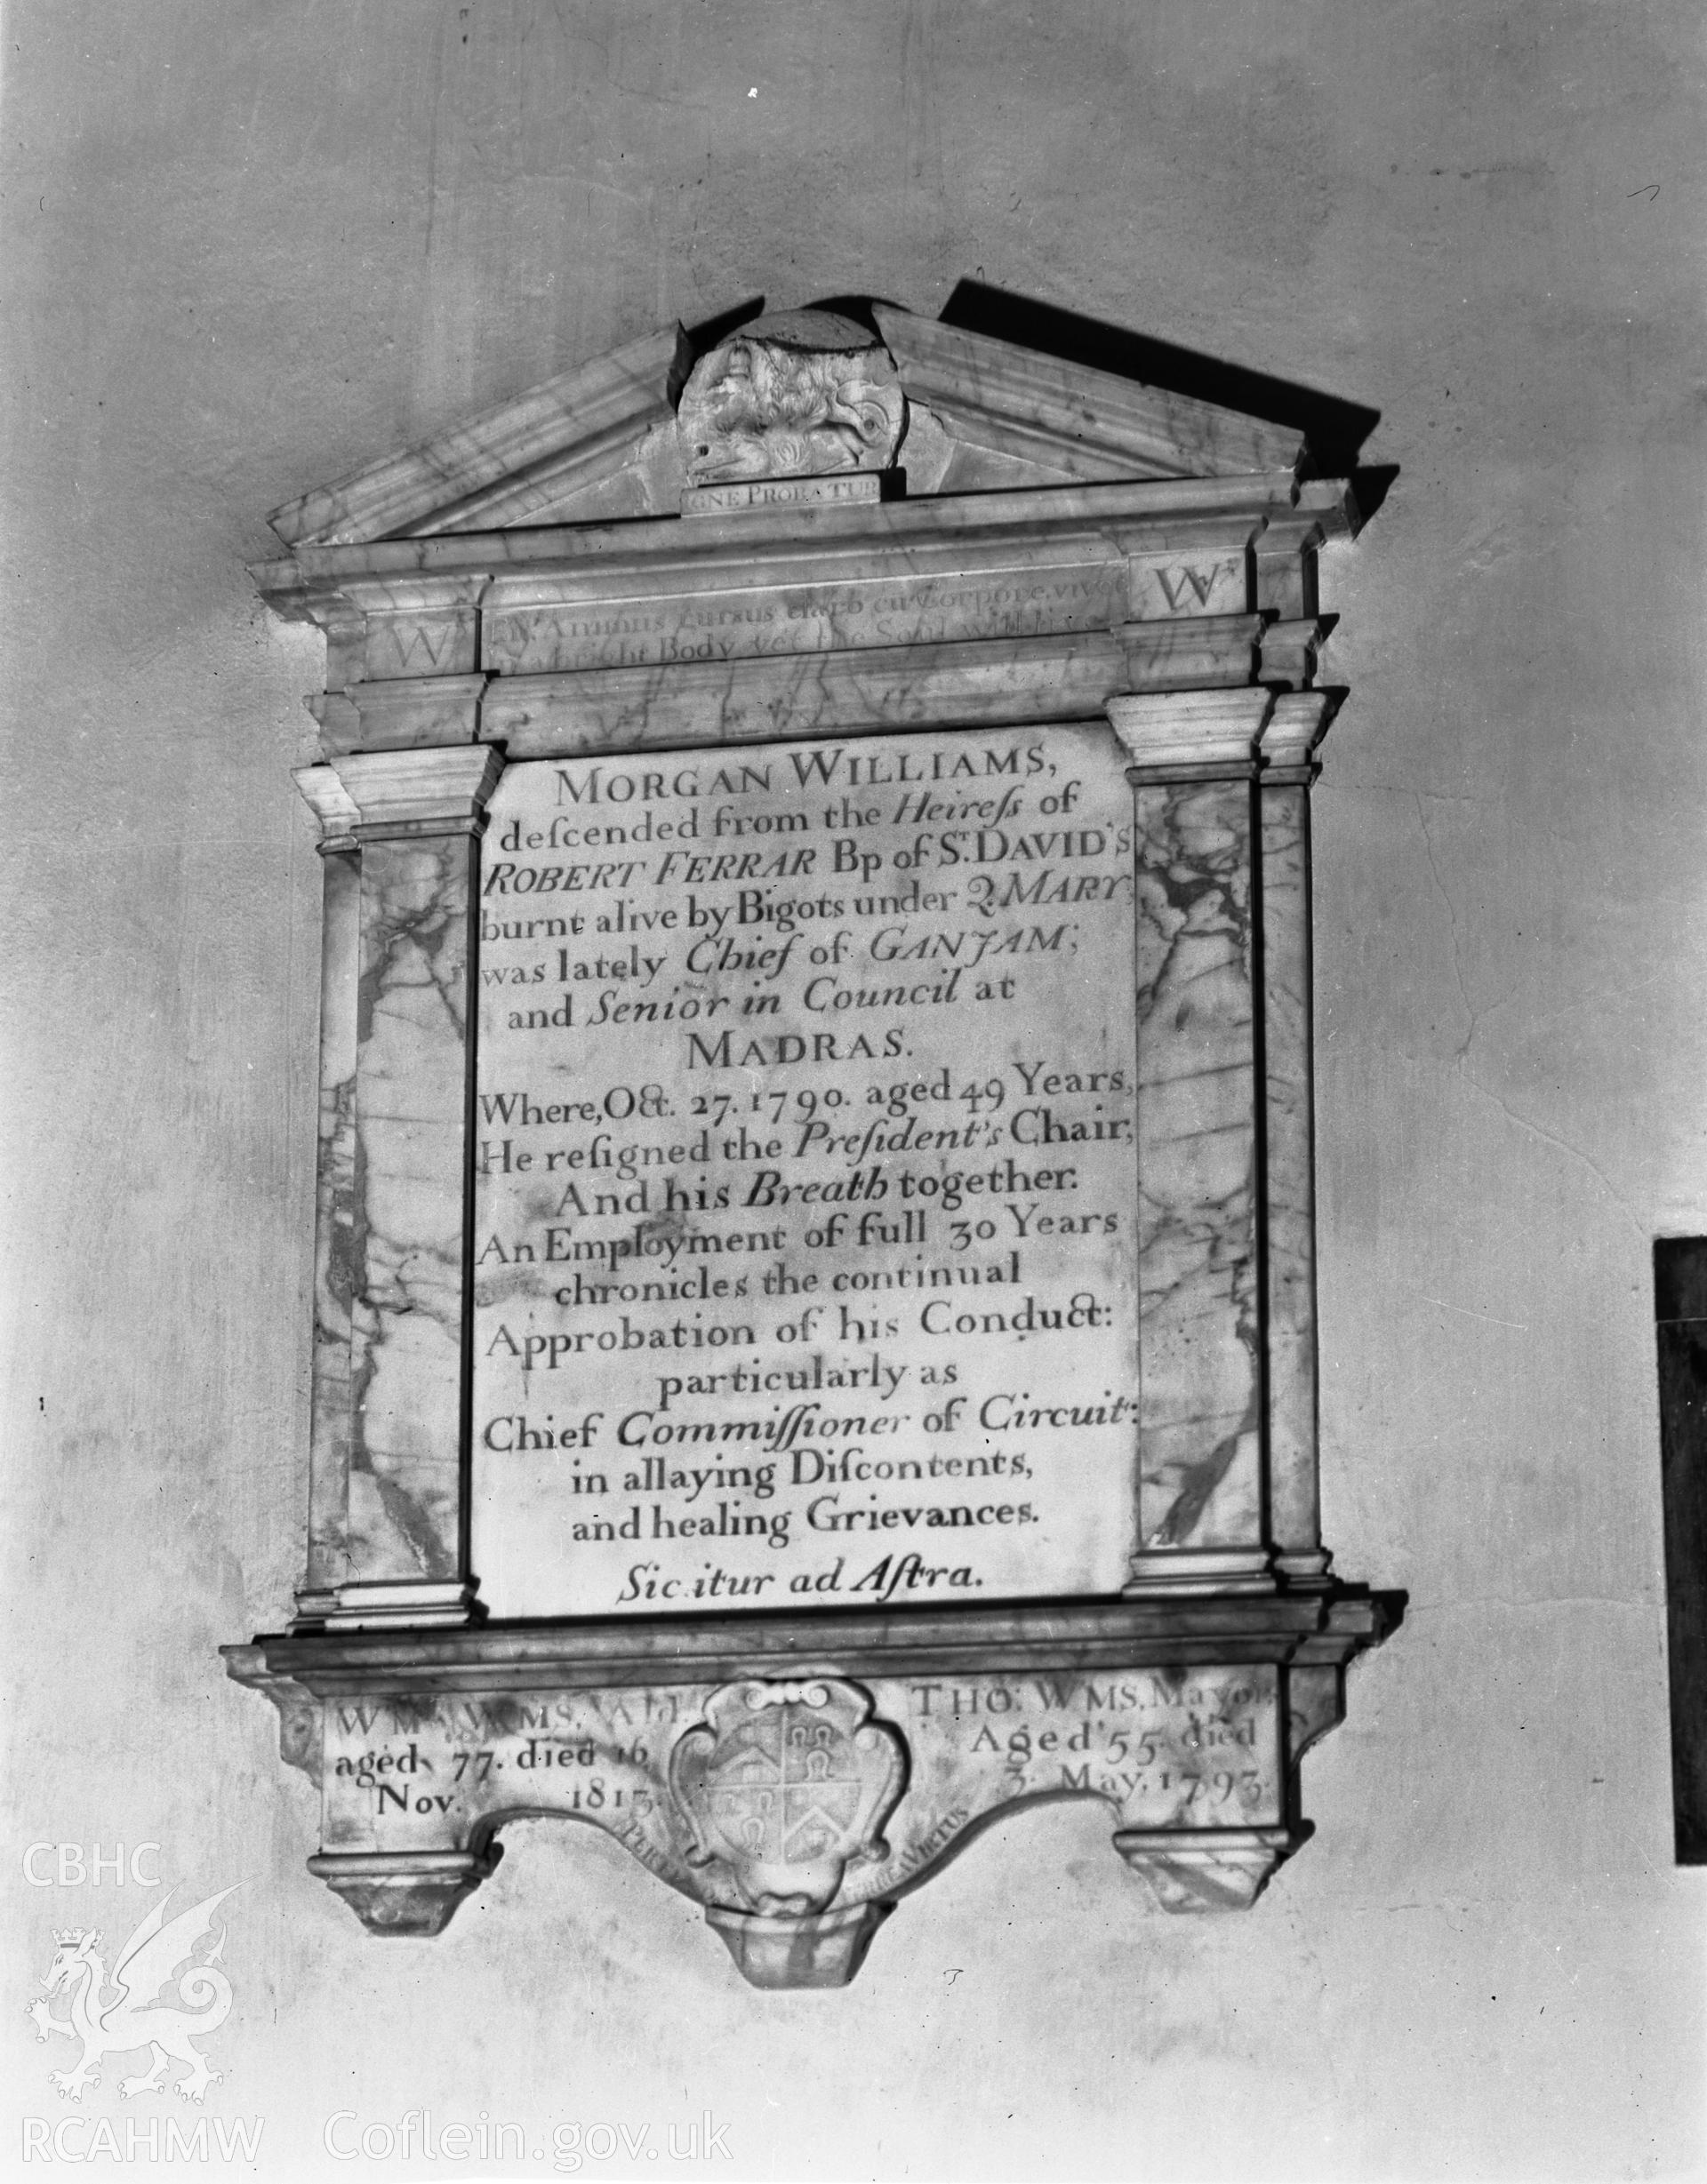 View of memorial to Morgan Williams in St Mary's Church, Tenby in 08.08.1941.